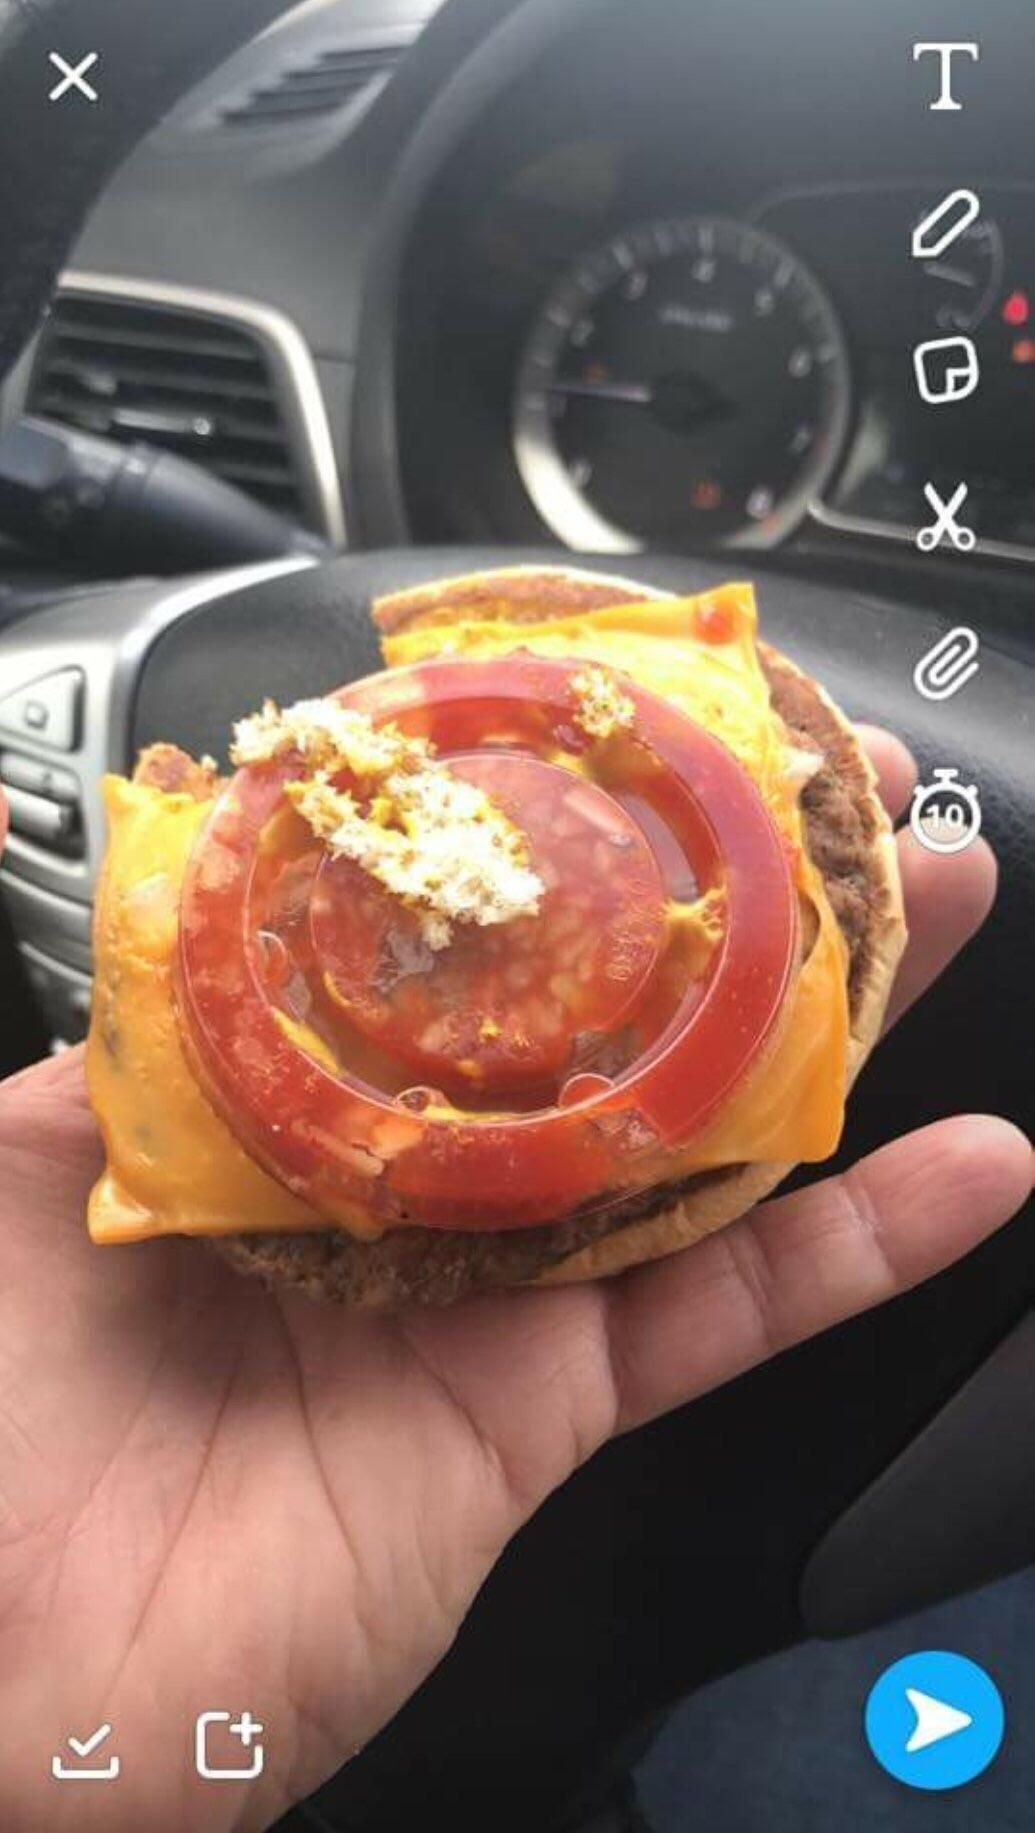 That's not a tomato...